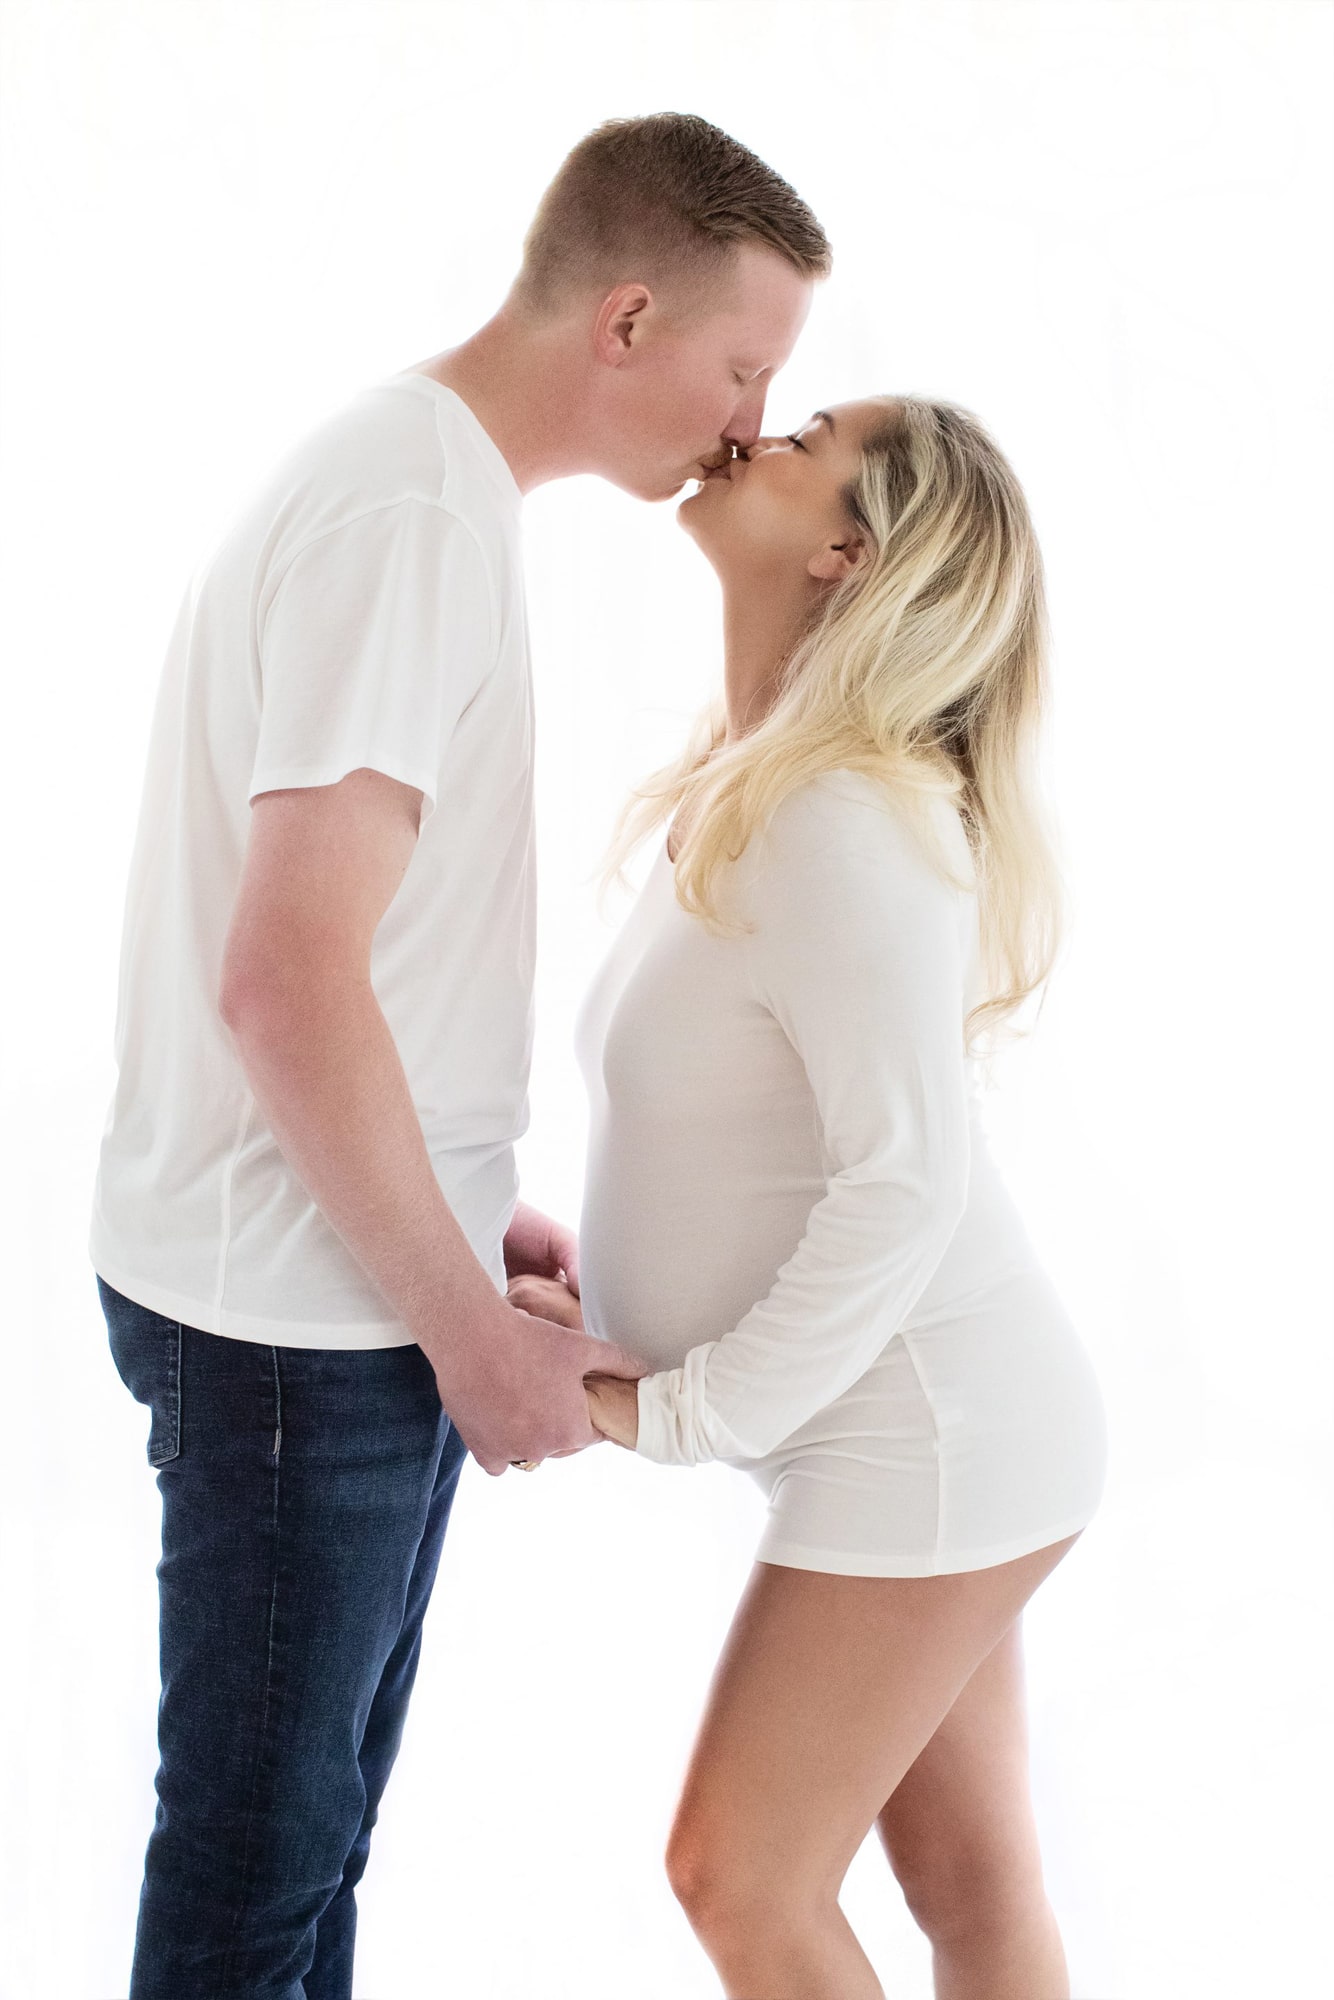 A pregnant woman and her husband kiss.